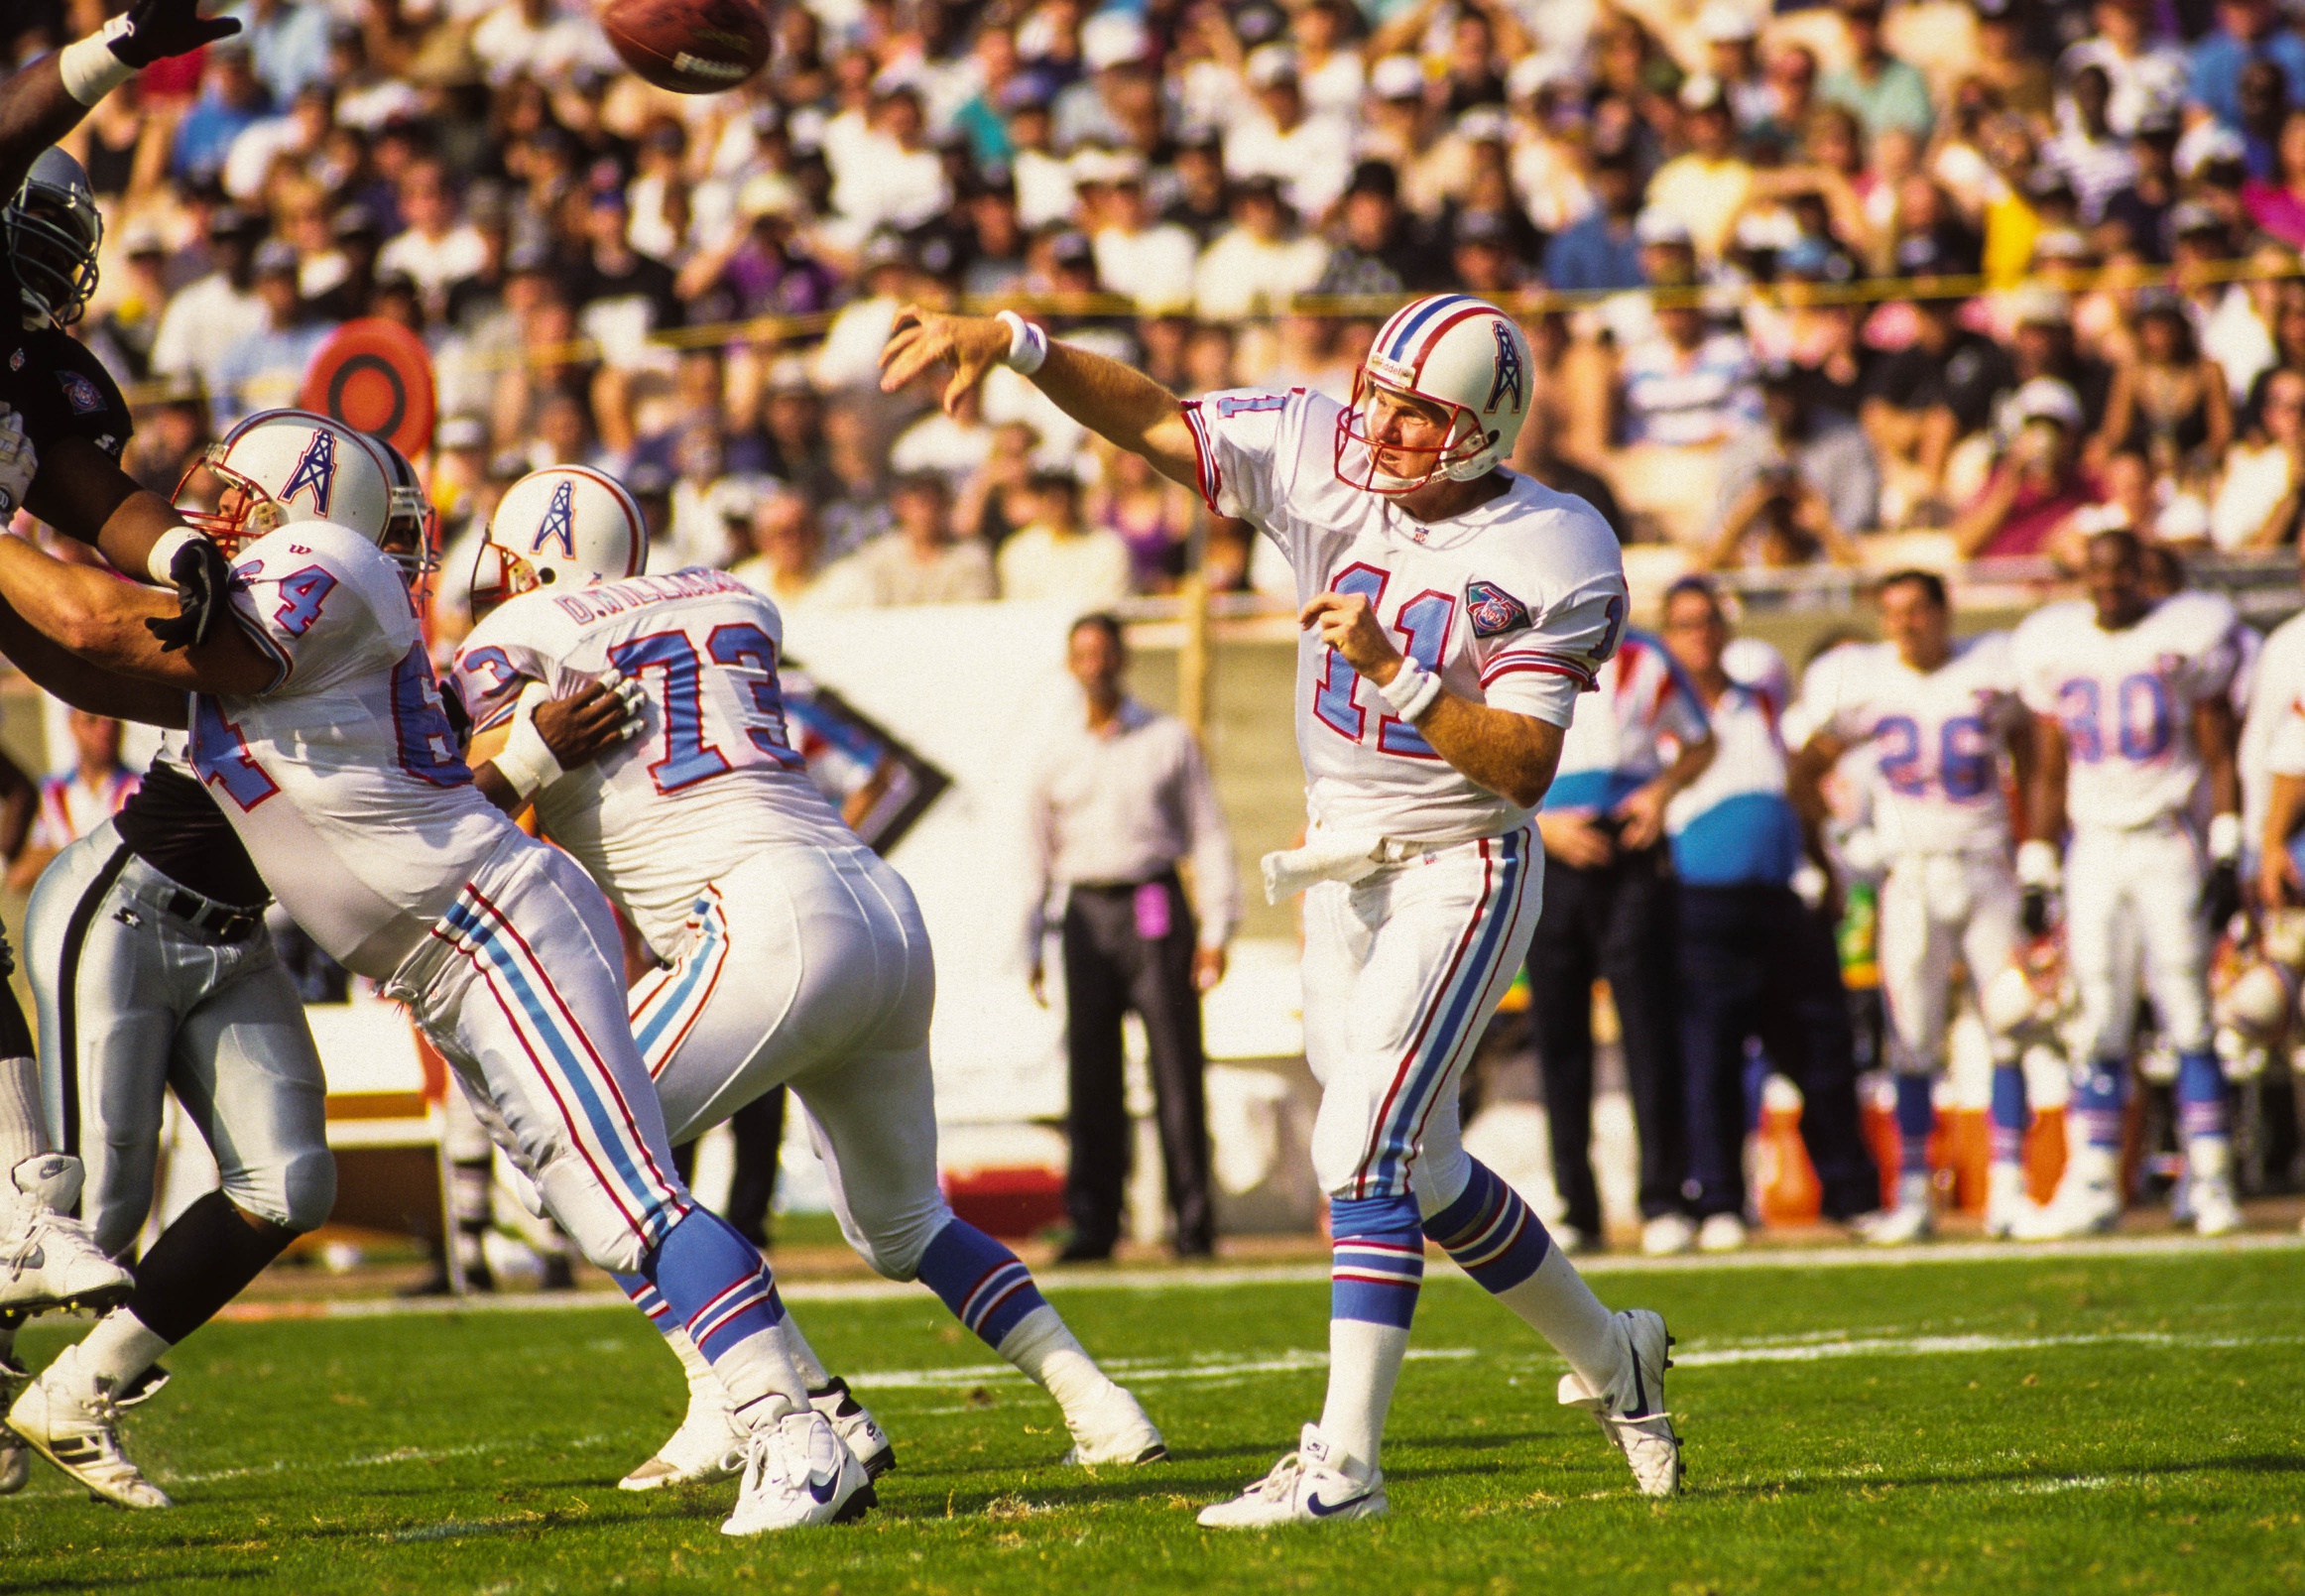 Tennessee Titans to wear throwback Oilers uniforms honoring